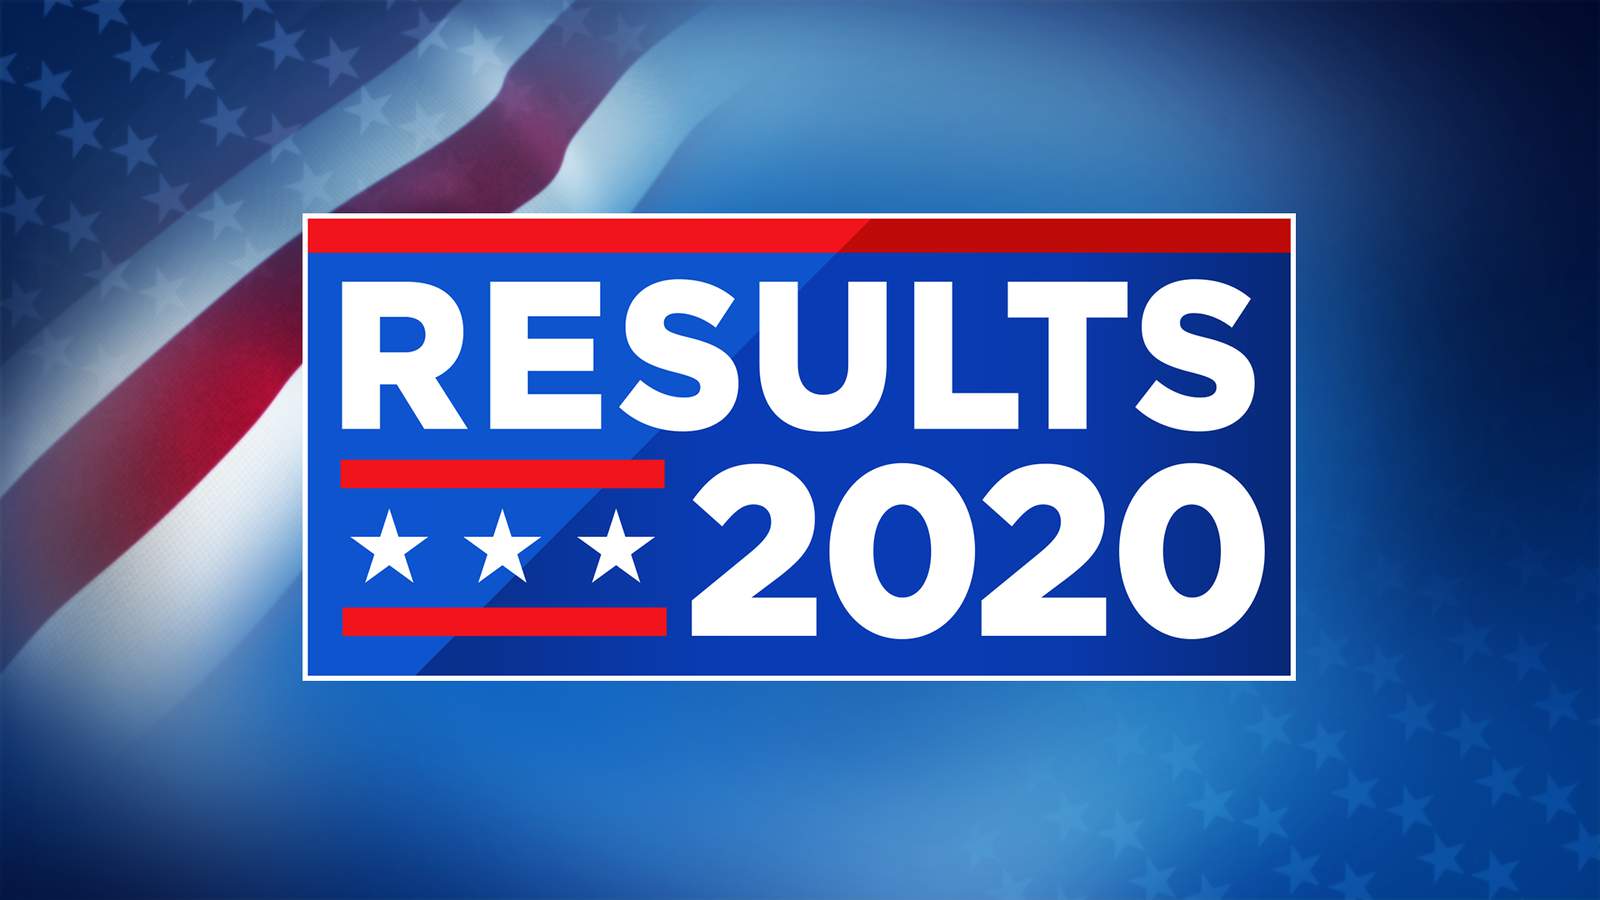 Florida General Election Results for Polk County on Nov. 3, 2020